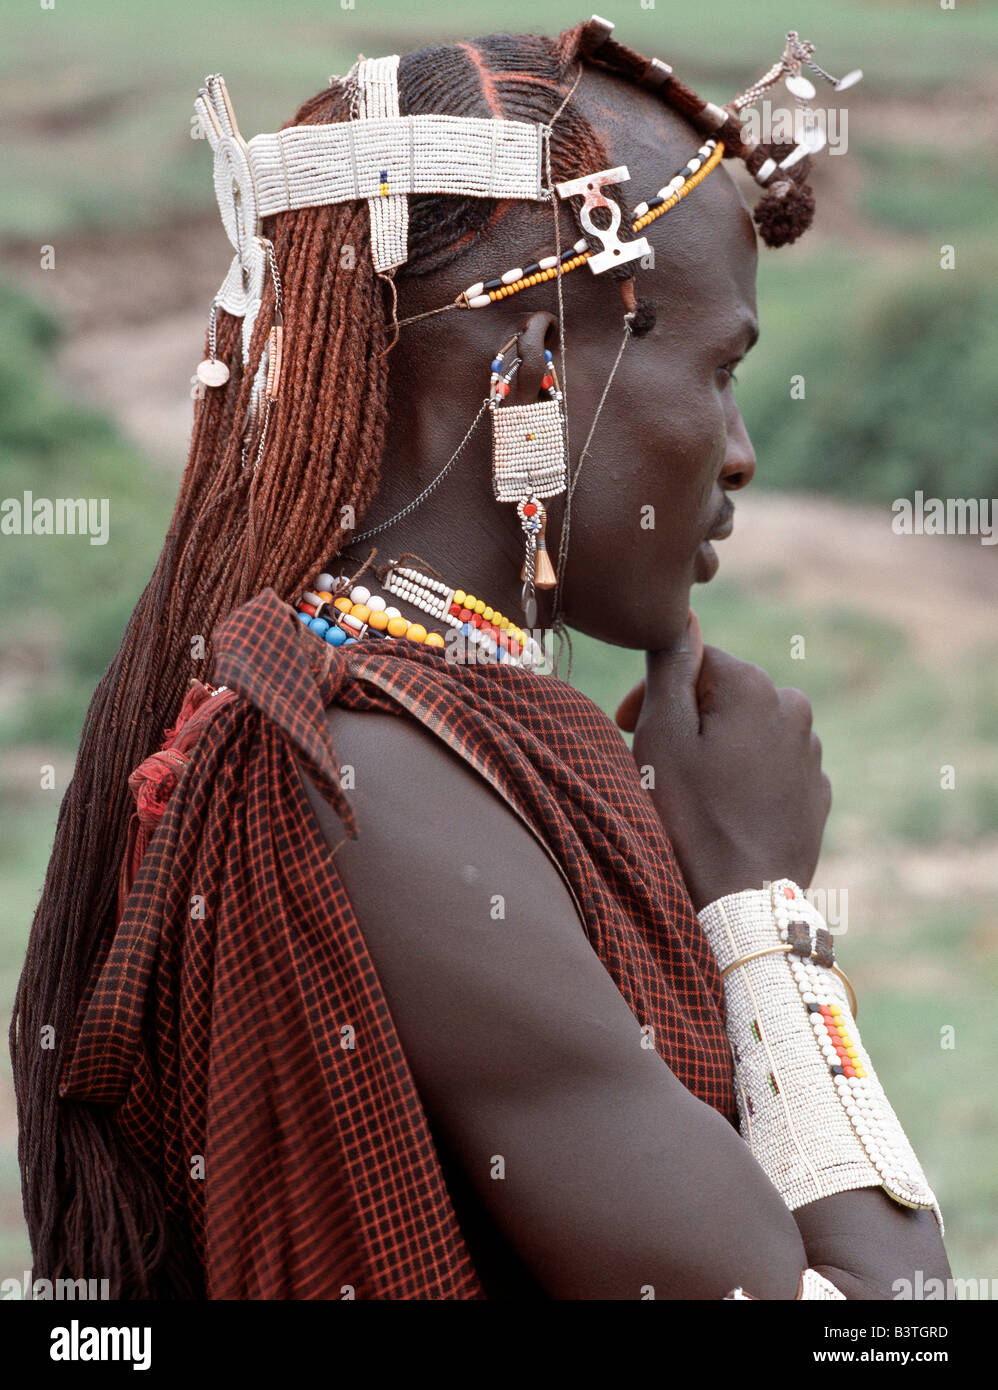 Tanzania, Northern Tanzania, Kerimasi. A warrior of the Kisongo section of the Maasai with his long Ochred braids decorated with beaded ornaments. His broad armulet is typical of the Kisongo living in northern Tanzania where white is the preferred colour of their beadwork. Stock Photo